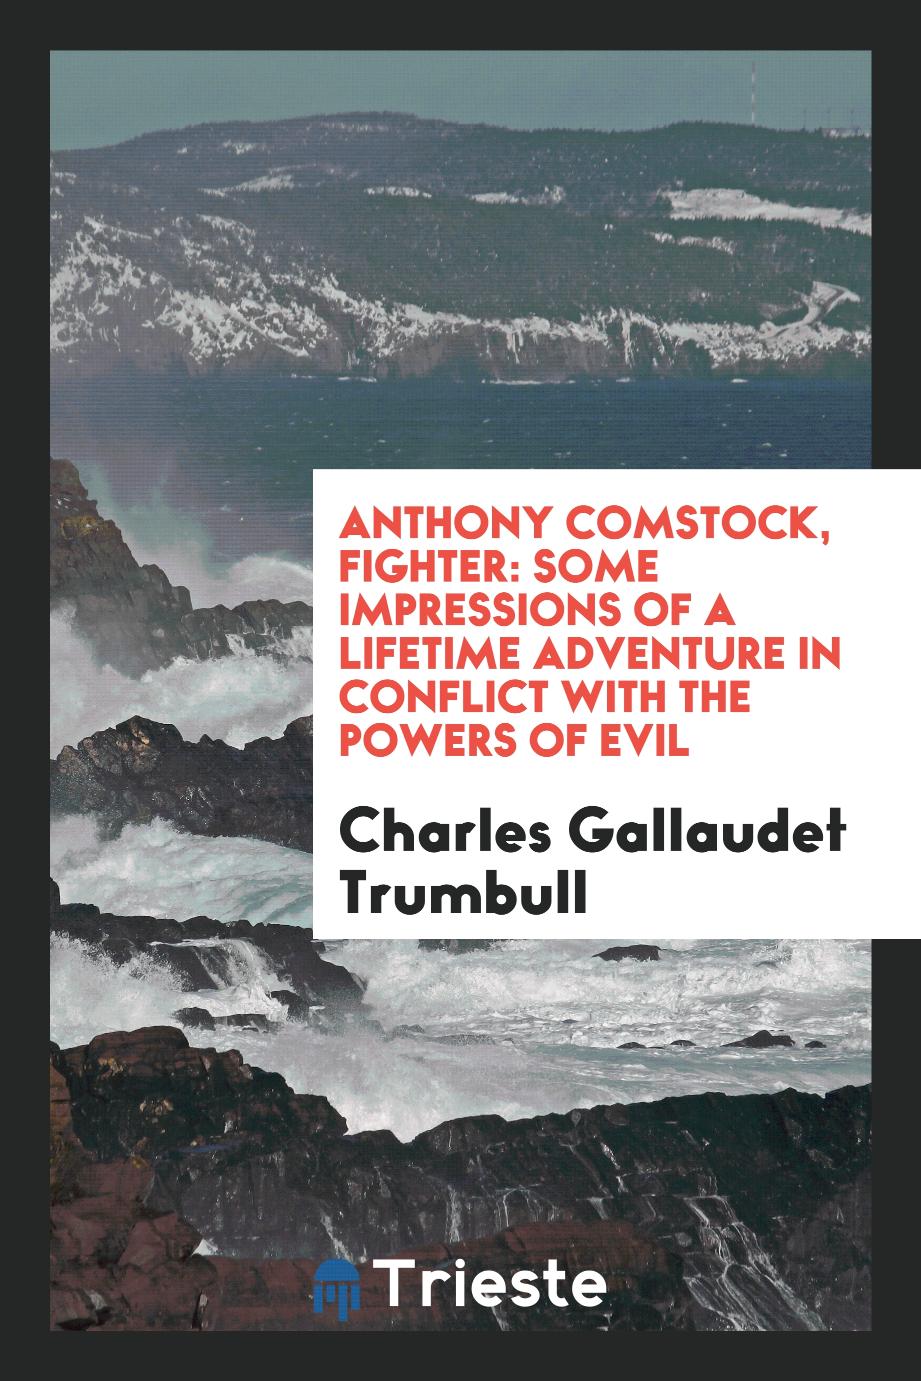 Anthony Comstock, Fighter: Some Impressions of a Lifetime Adventure in Conflict with the Powers of Evil